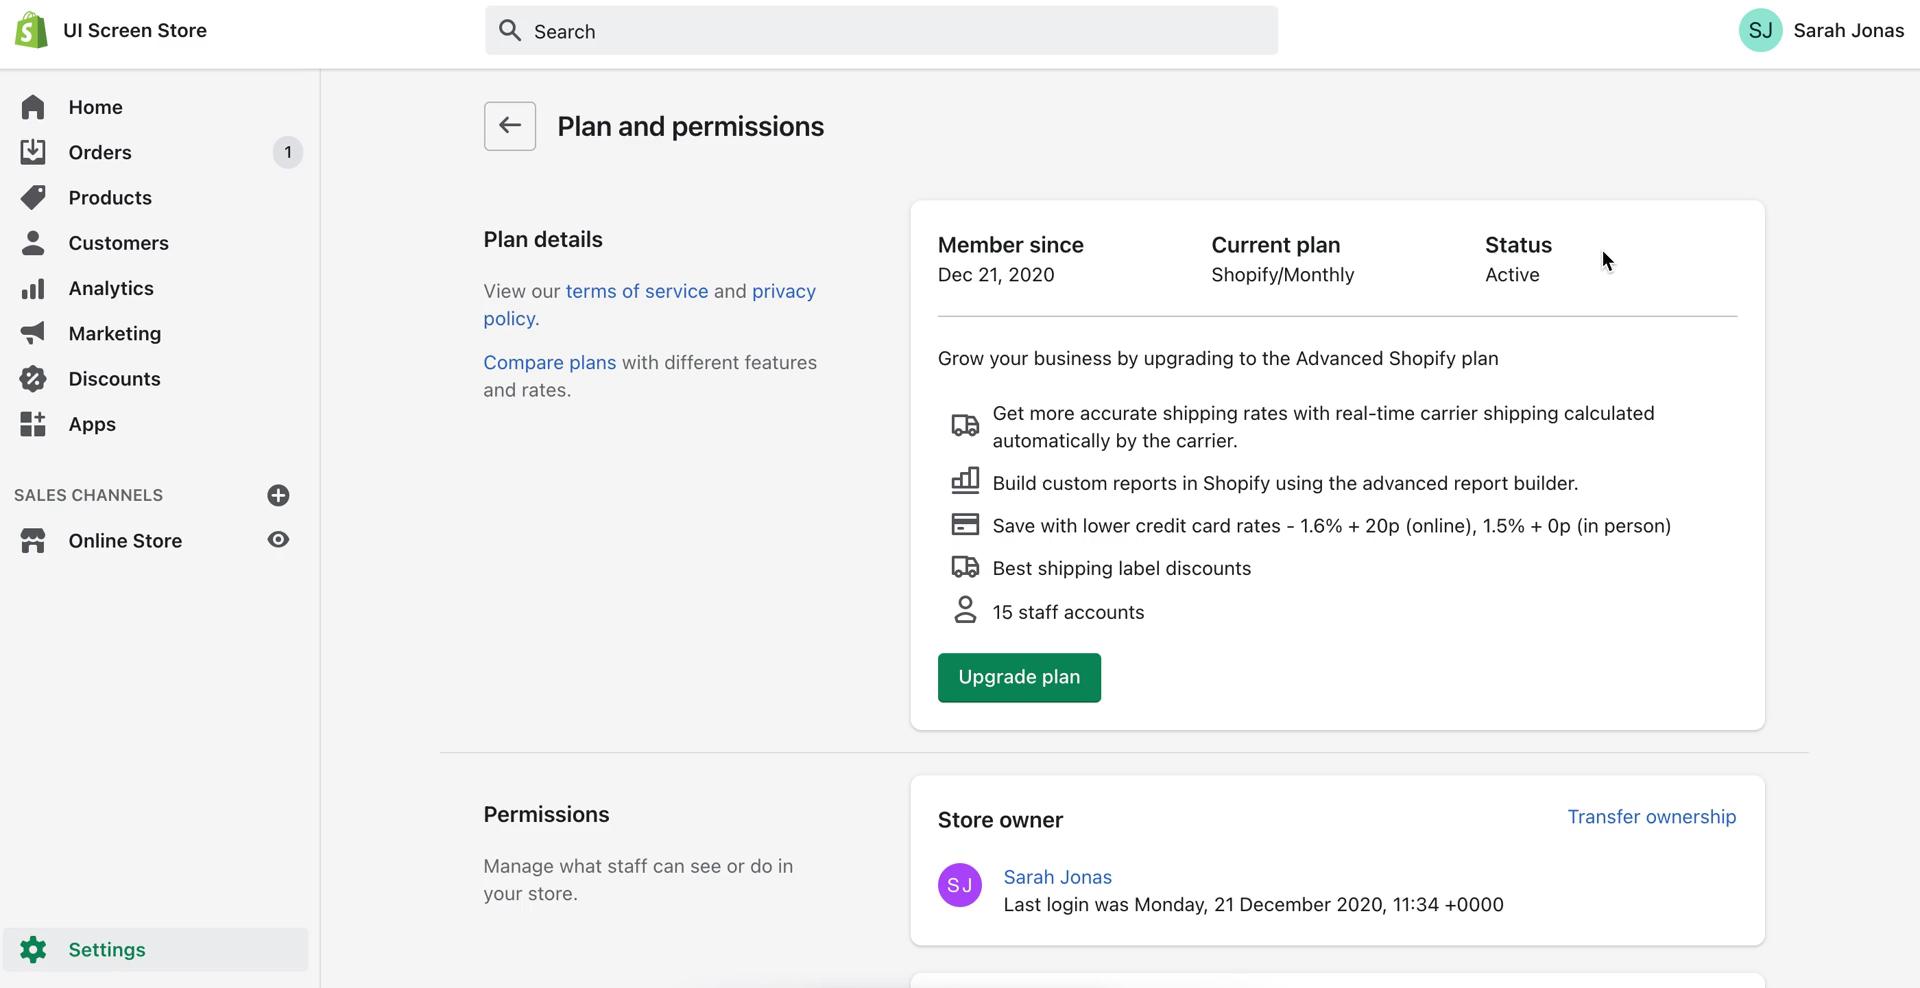 Screenshot of Permissions on Deleting your account on Shopify user flow